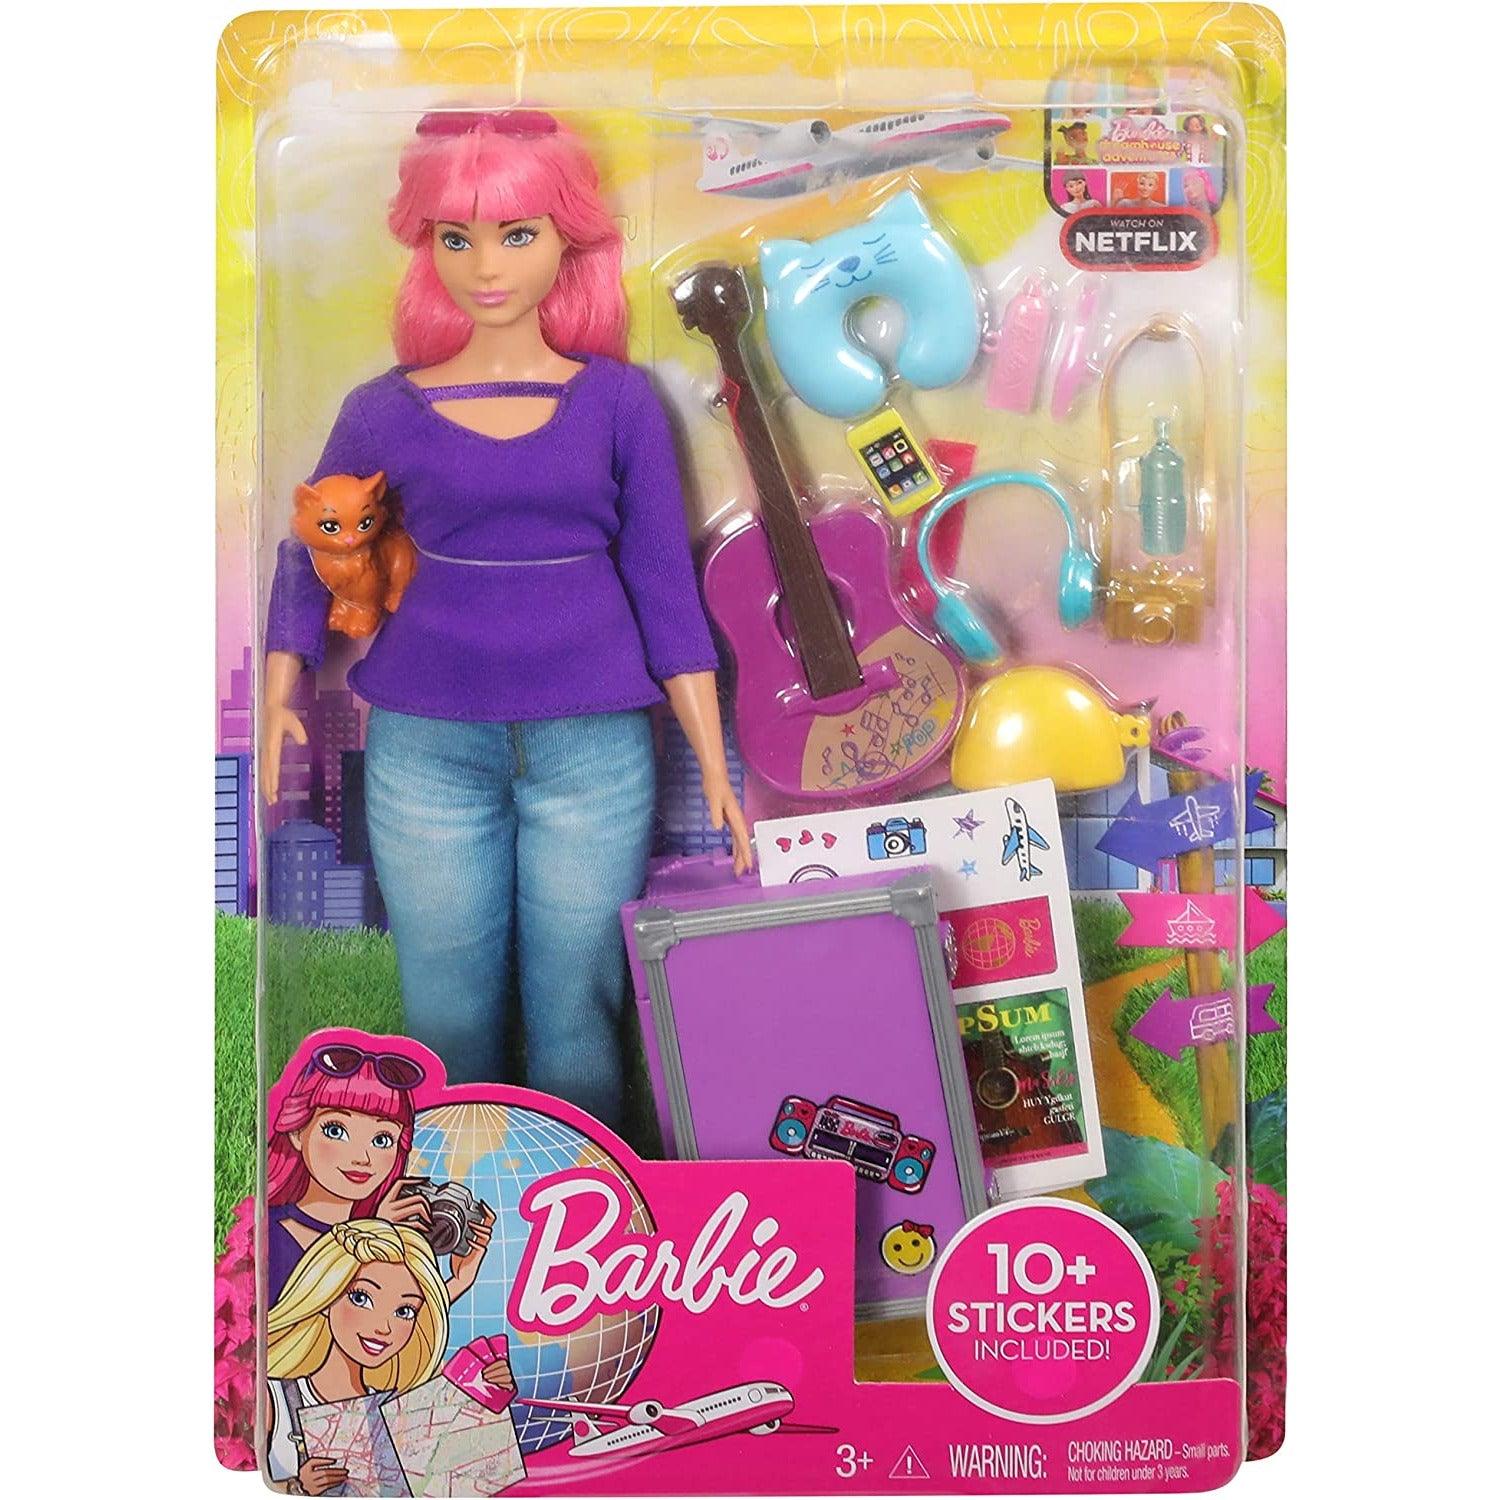 Barbie Dreamhouse Adventures Doll & Accessories, Travel Set with Daisy Doll, Kitten, Working Suitcase & 9 Pieces